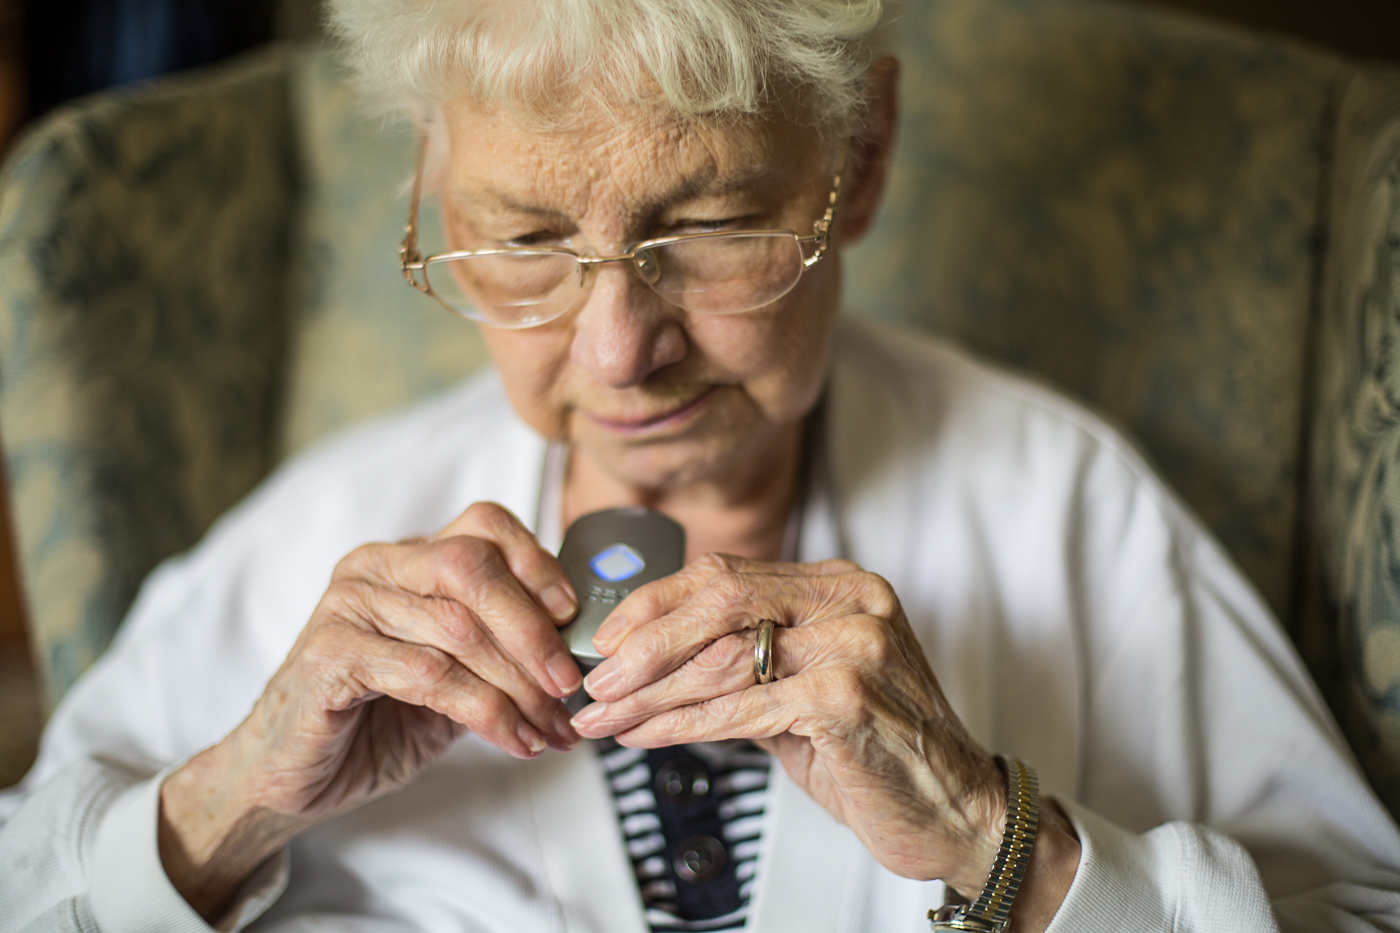 healthcare photographer - an elderly woman tests a life alert device that hands around her neck